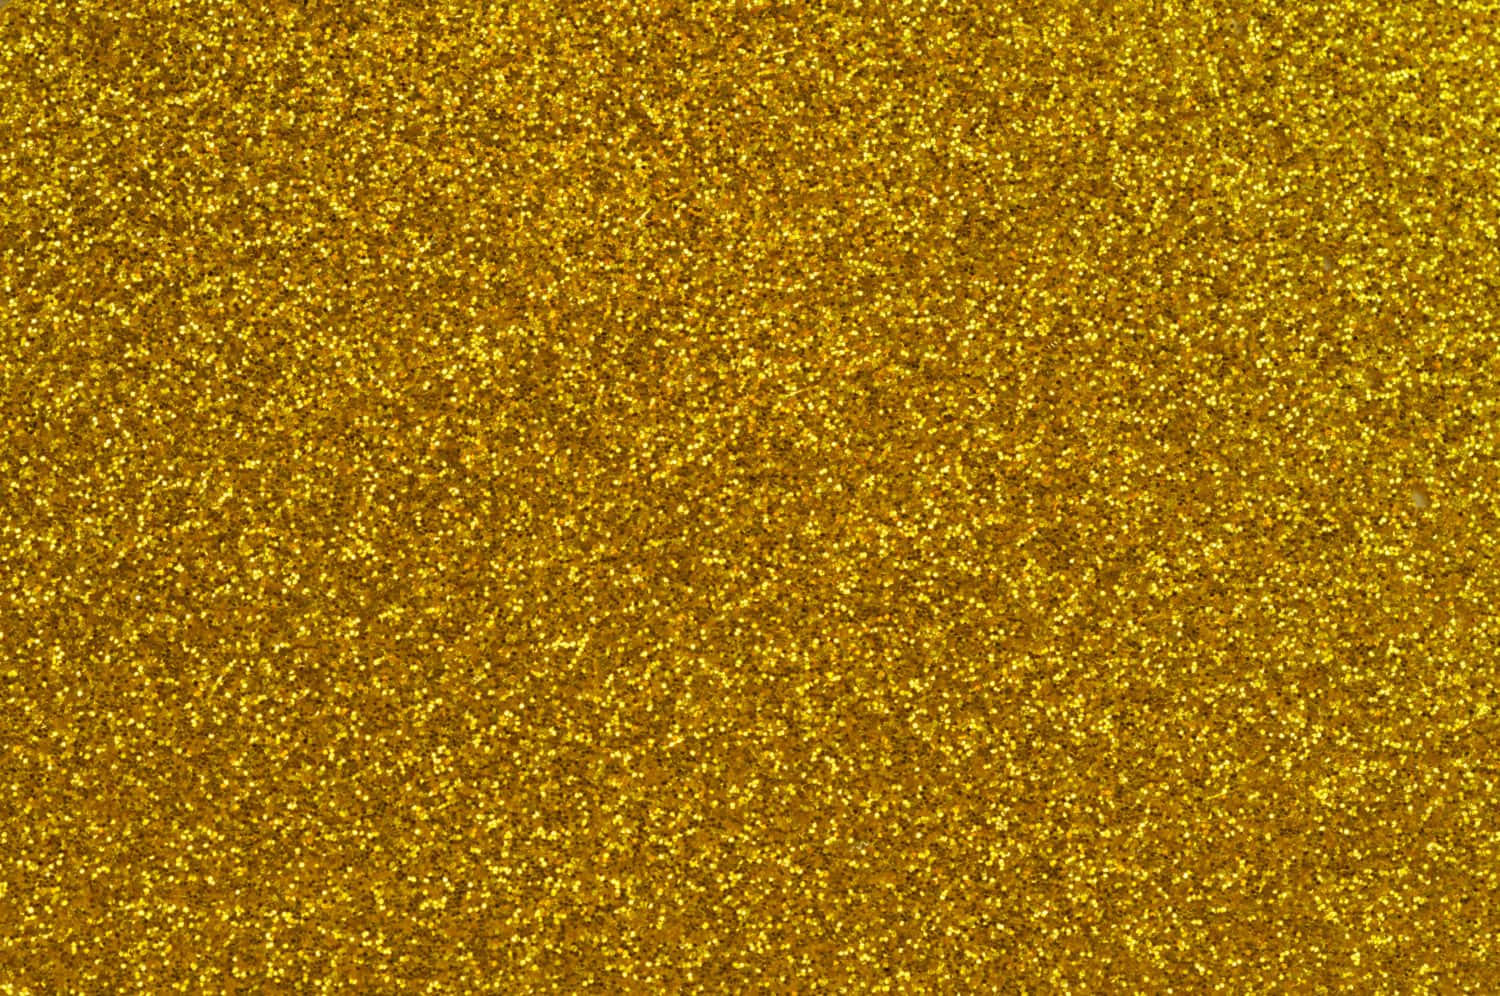 Shine Bright and Make a Statement with Glittery Backgrounds